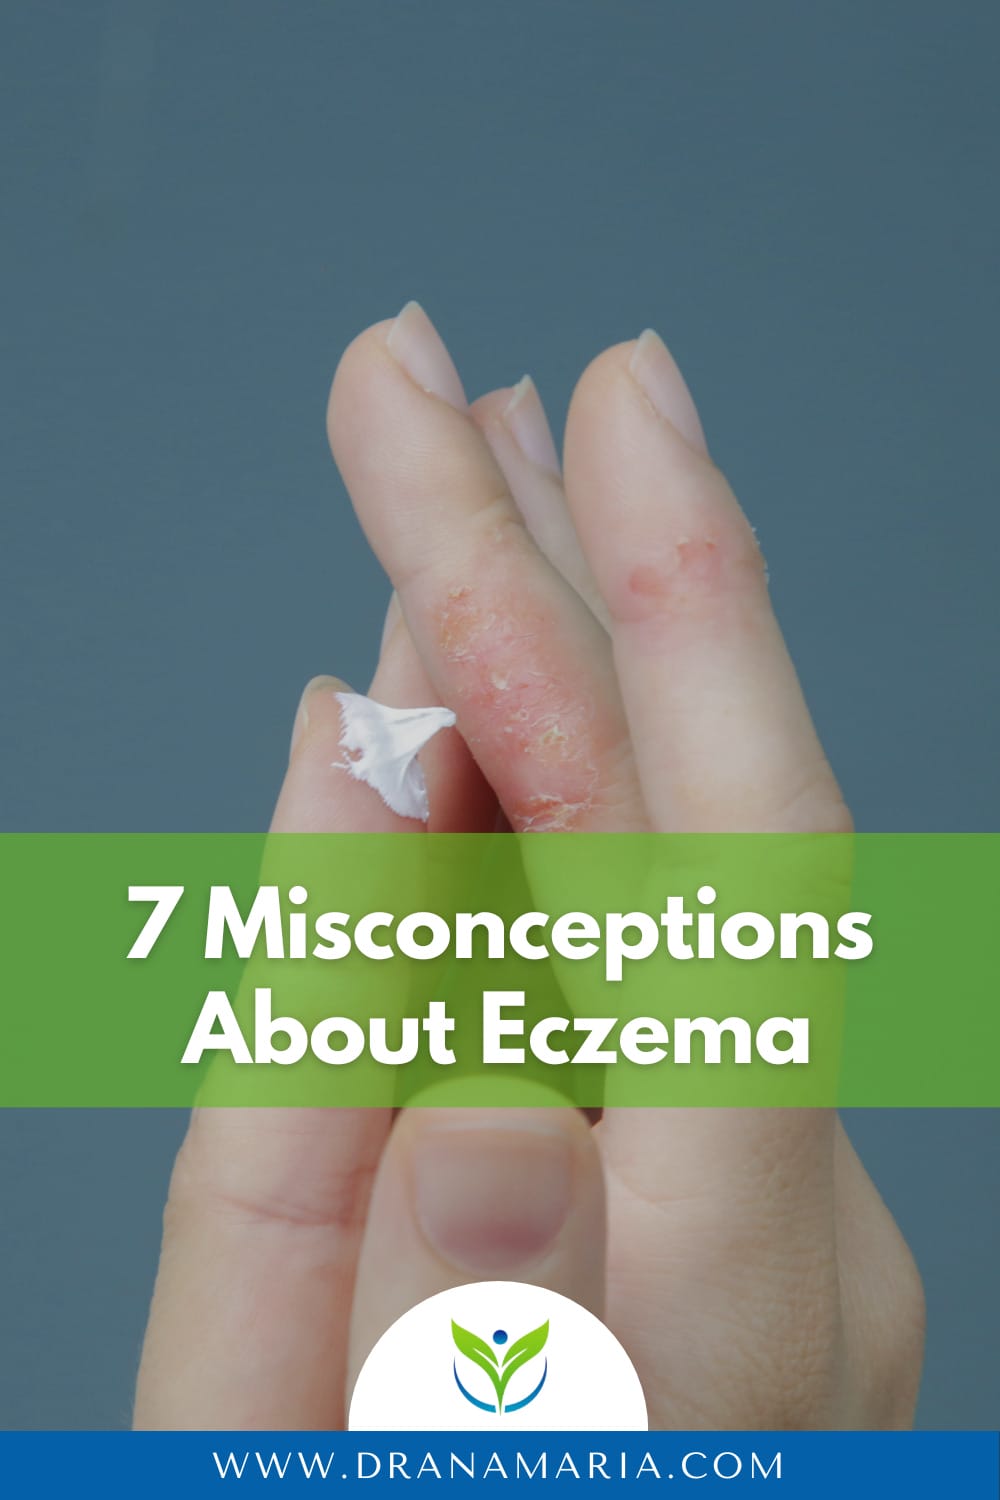 7 Misconceptions About Eczema (1)